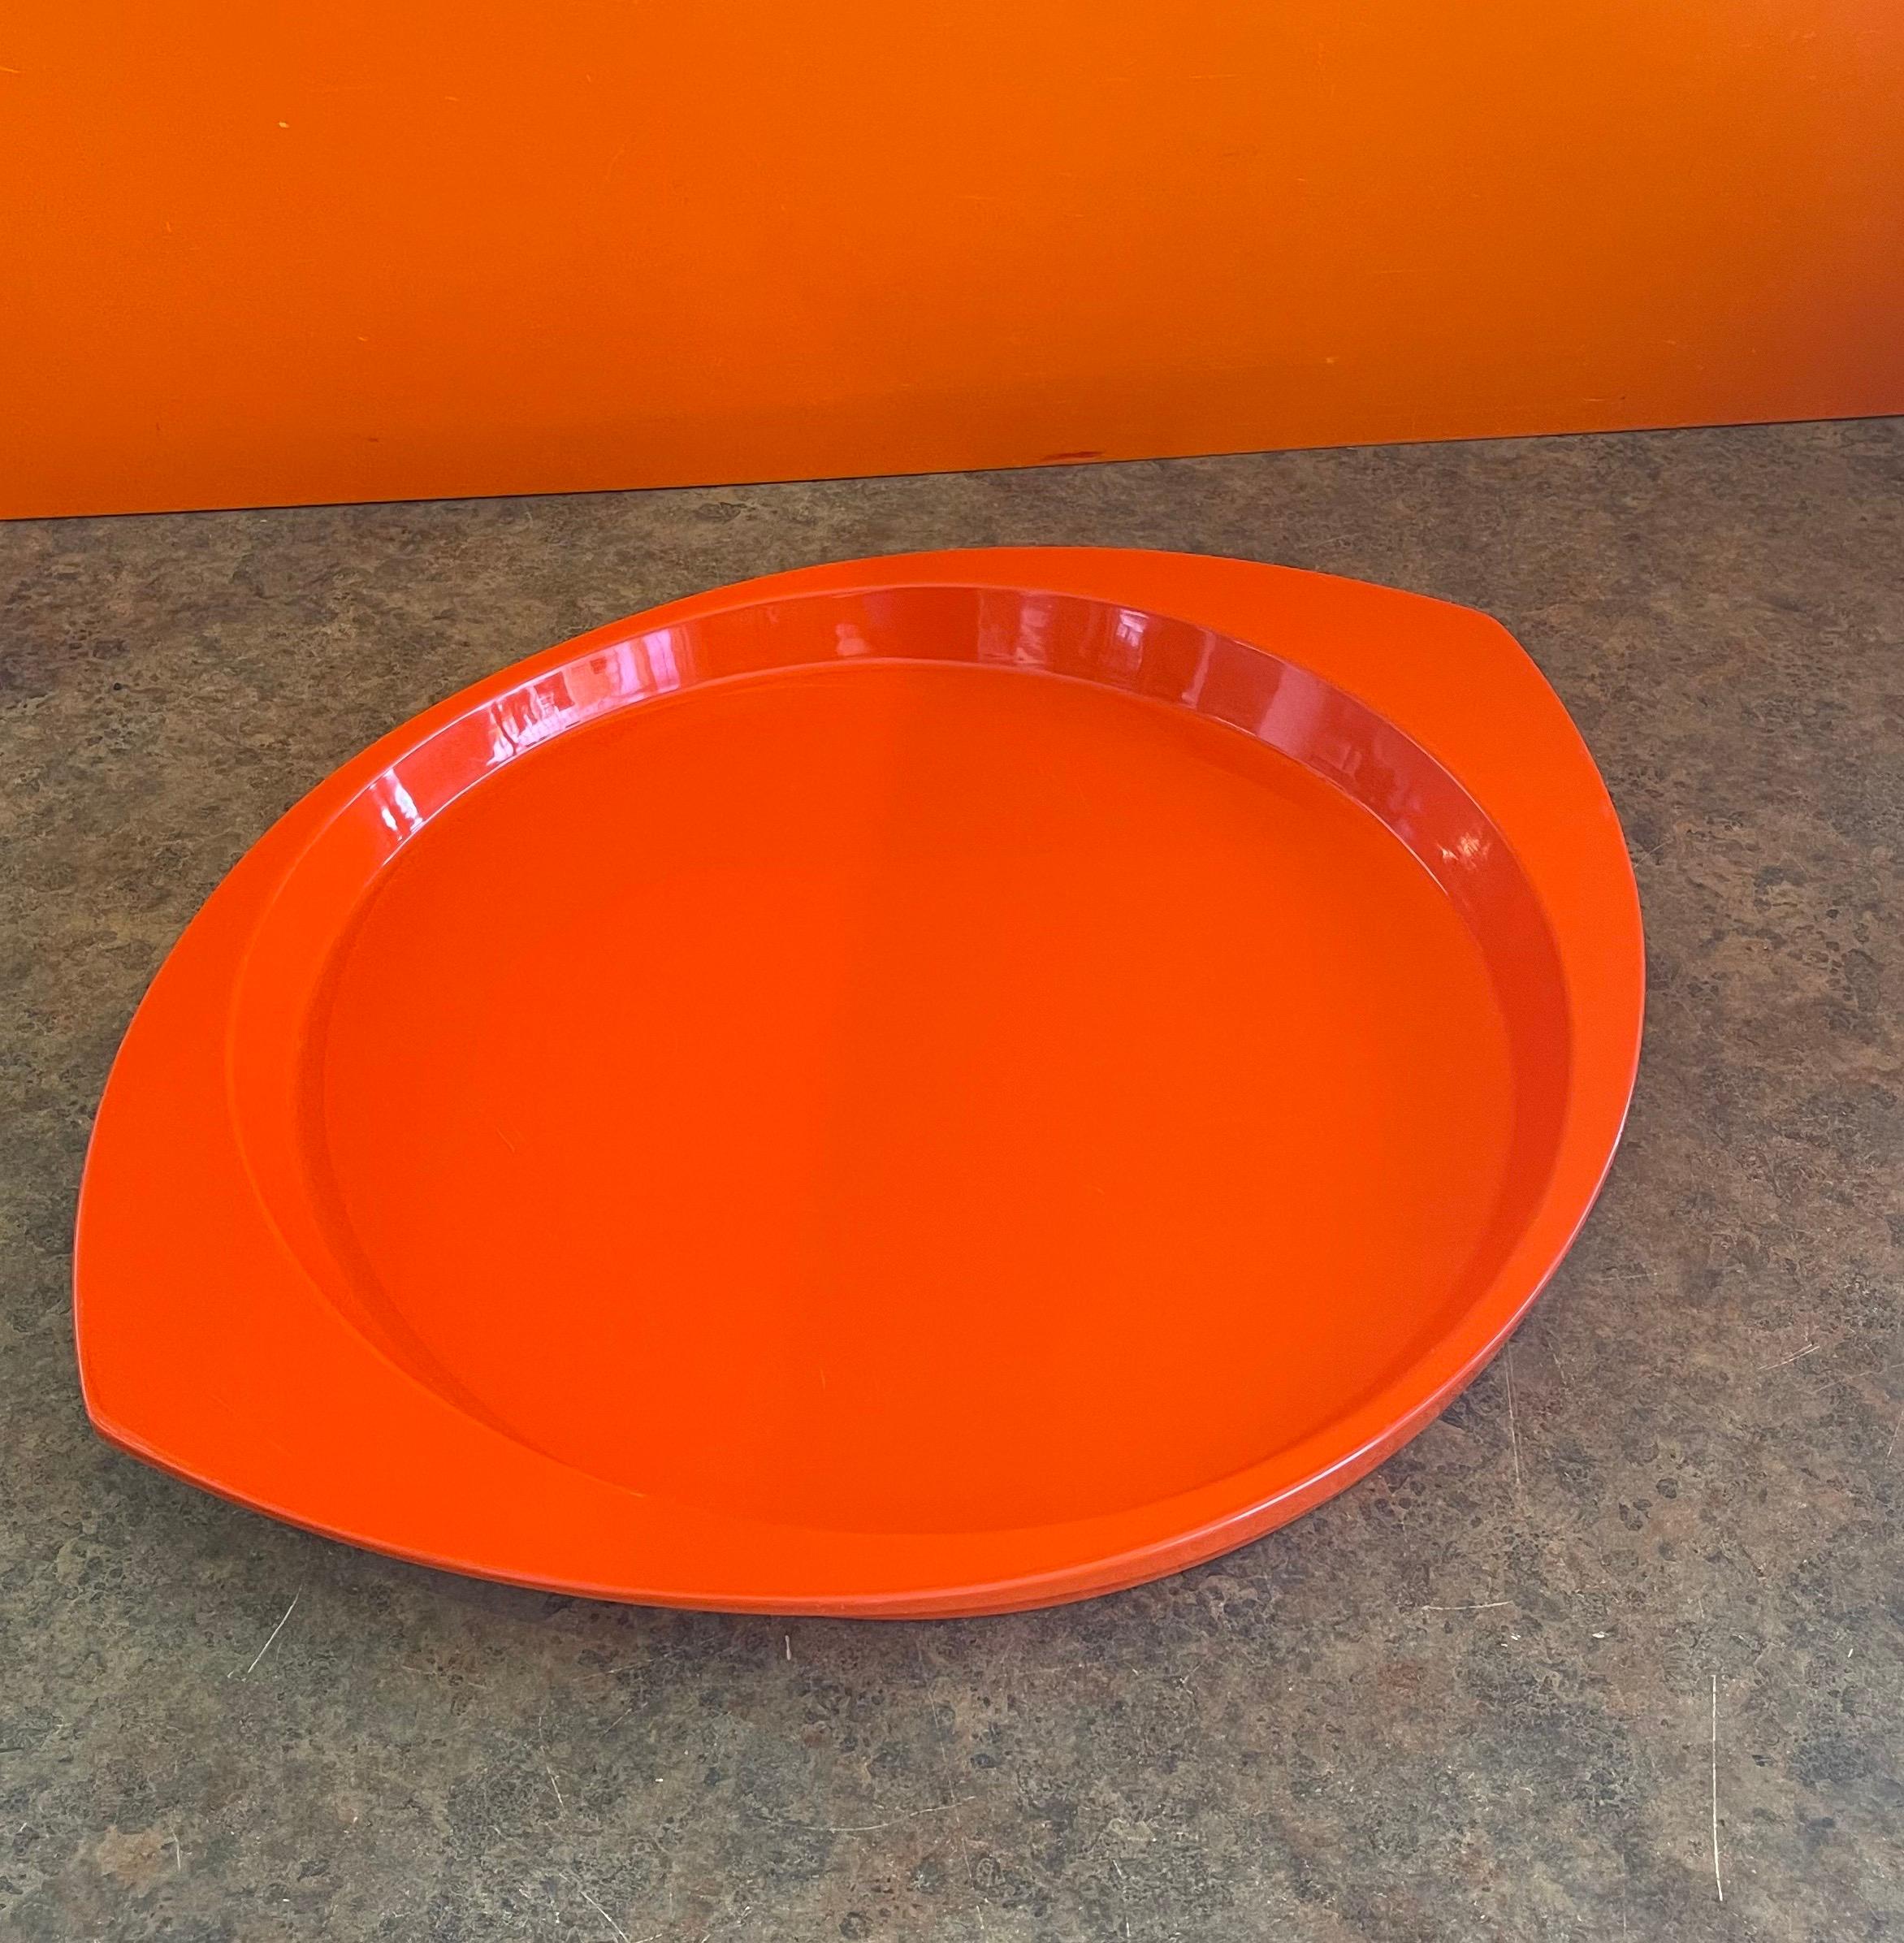 Lacquered Large Oval Orange Lacquer Tray by Jens Quistgaard for Dansk, Early Production